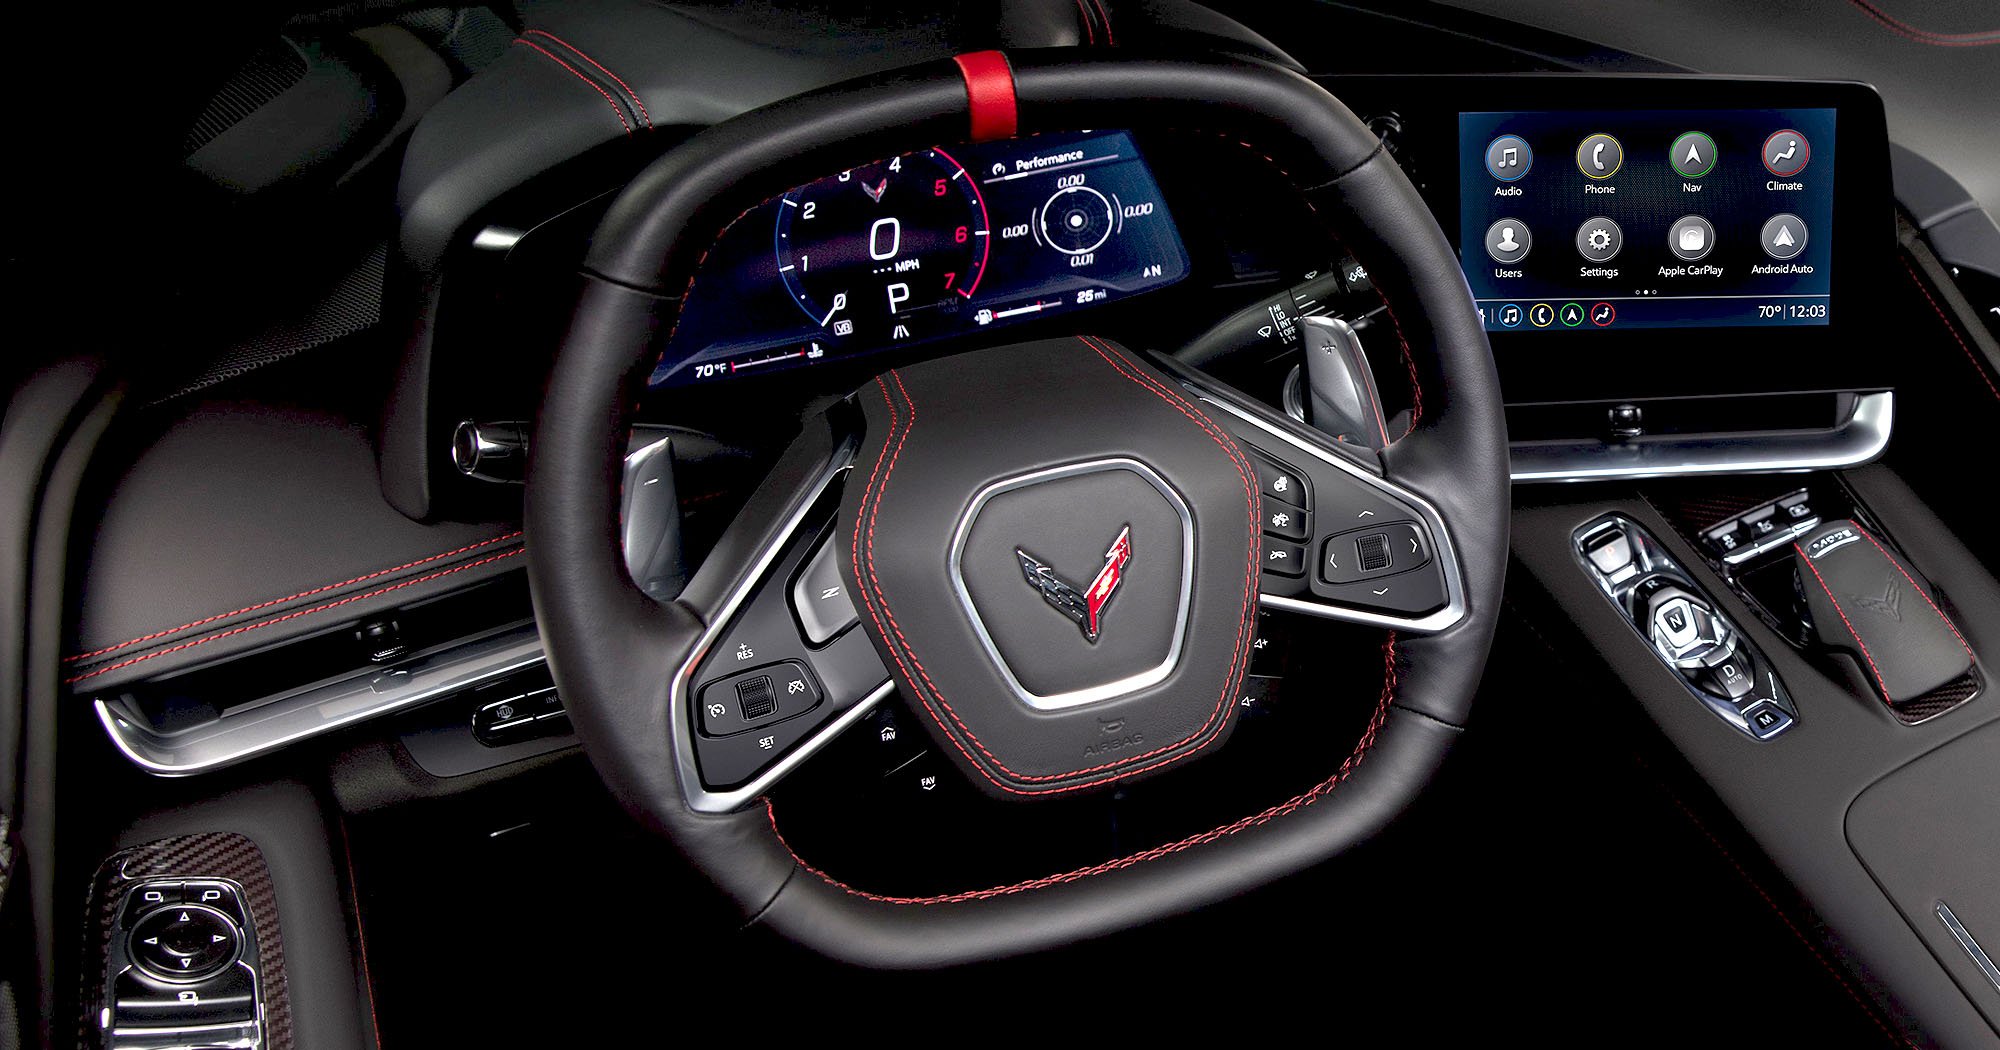 is-the-2020-c8-corvette-steering-wheel-as-good-as-the-car-or-is-it-a-disappoint-149736_1.jpg